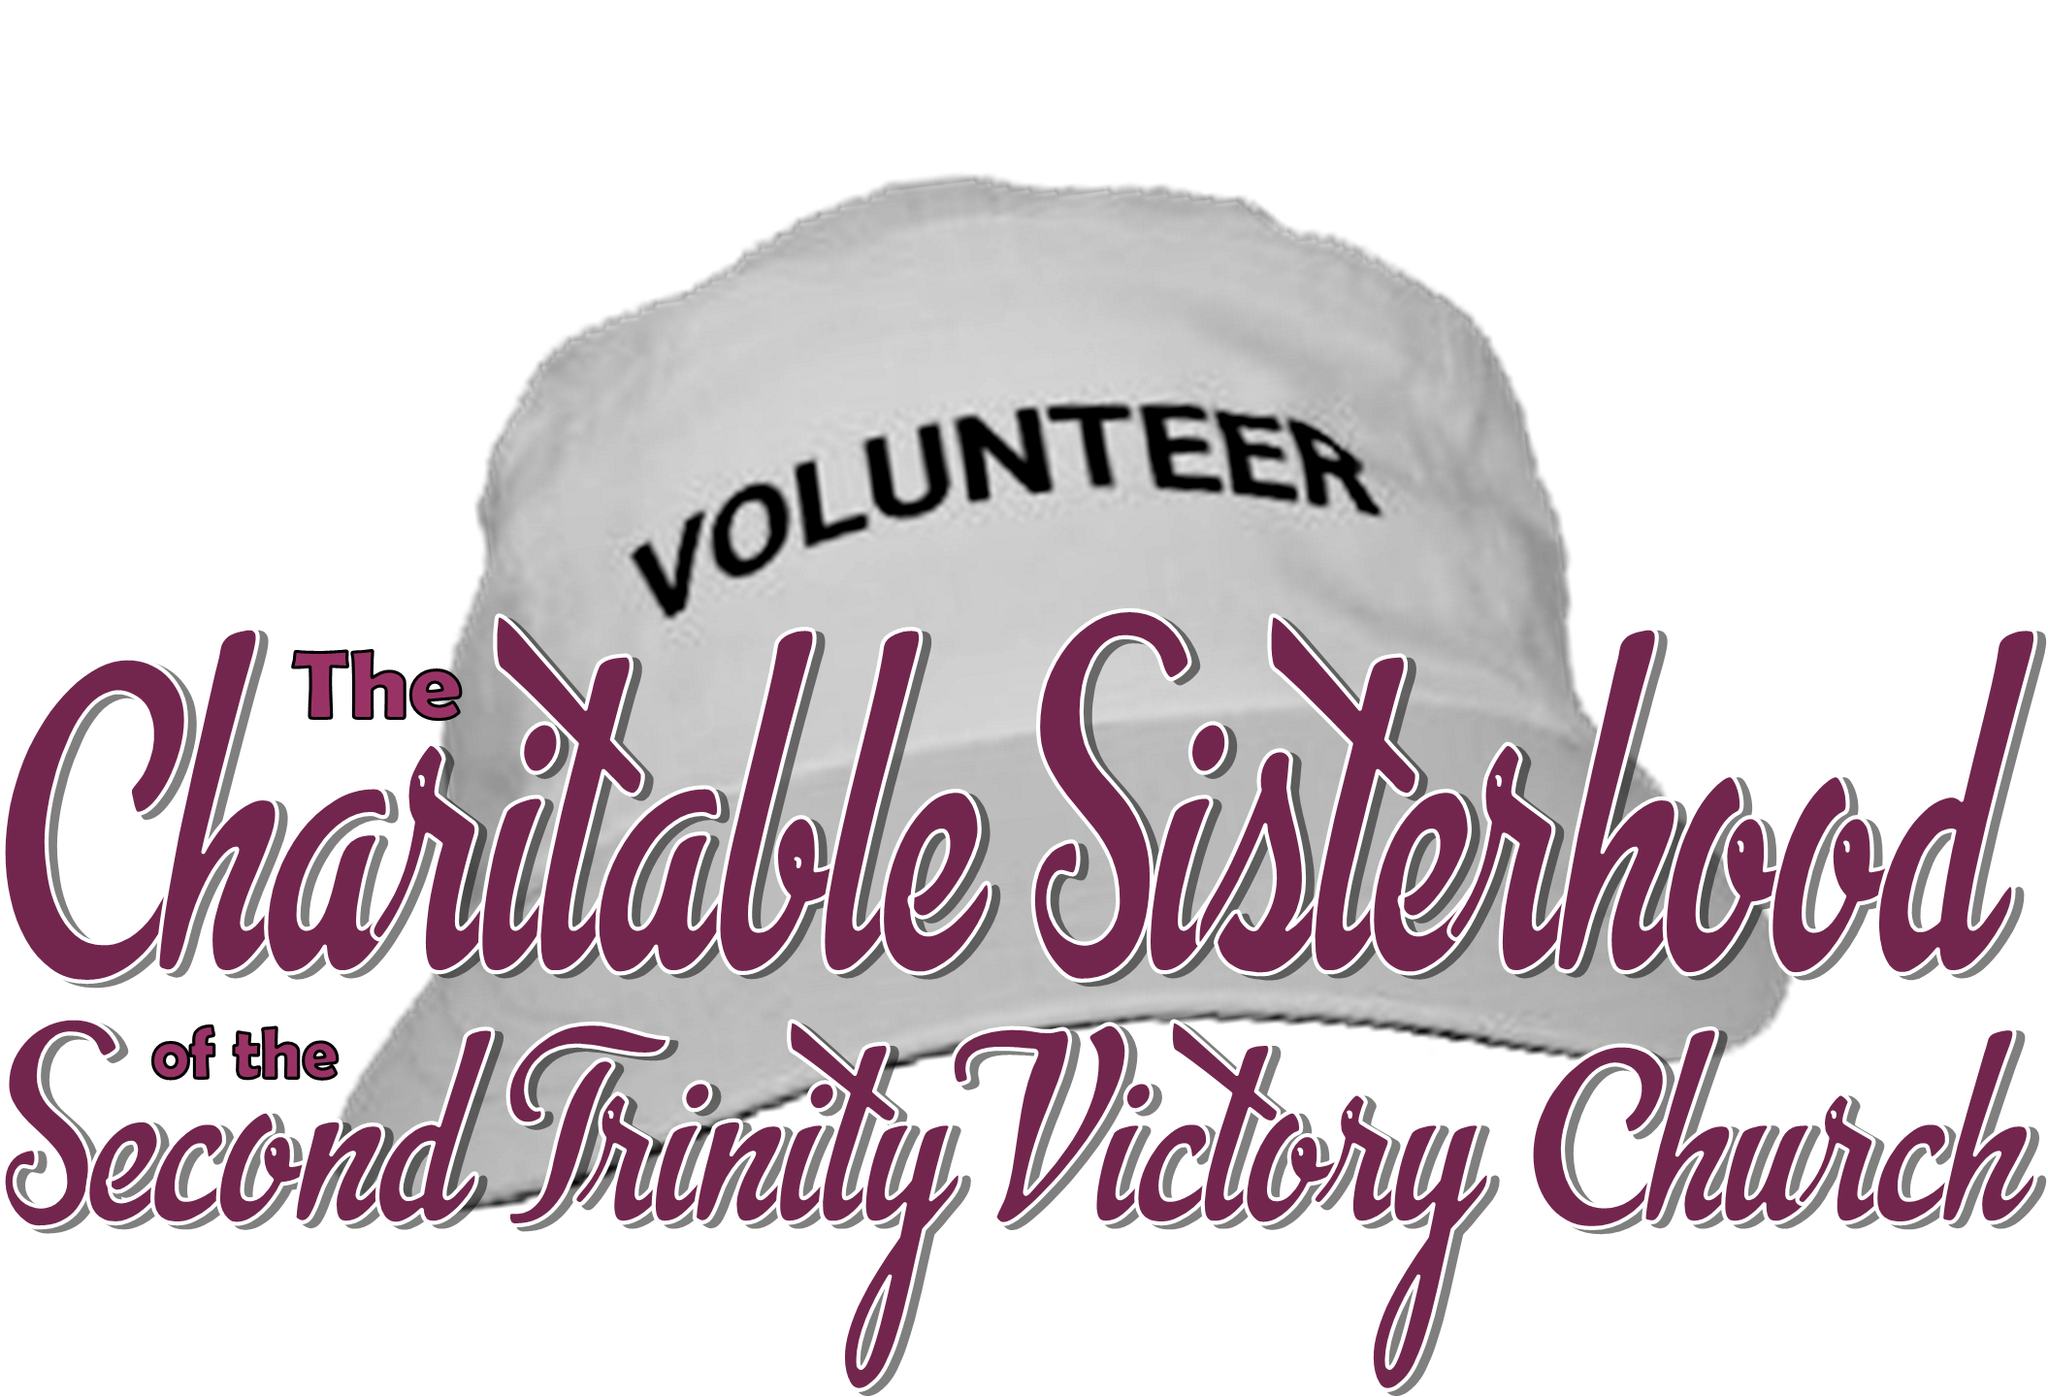 The Charitable SIsterhood of the Second Trinity Victory Church by Playhouse 2000